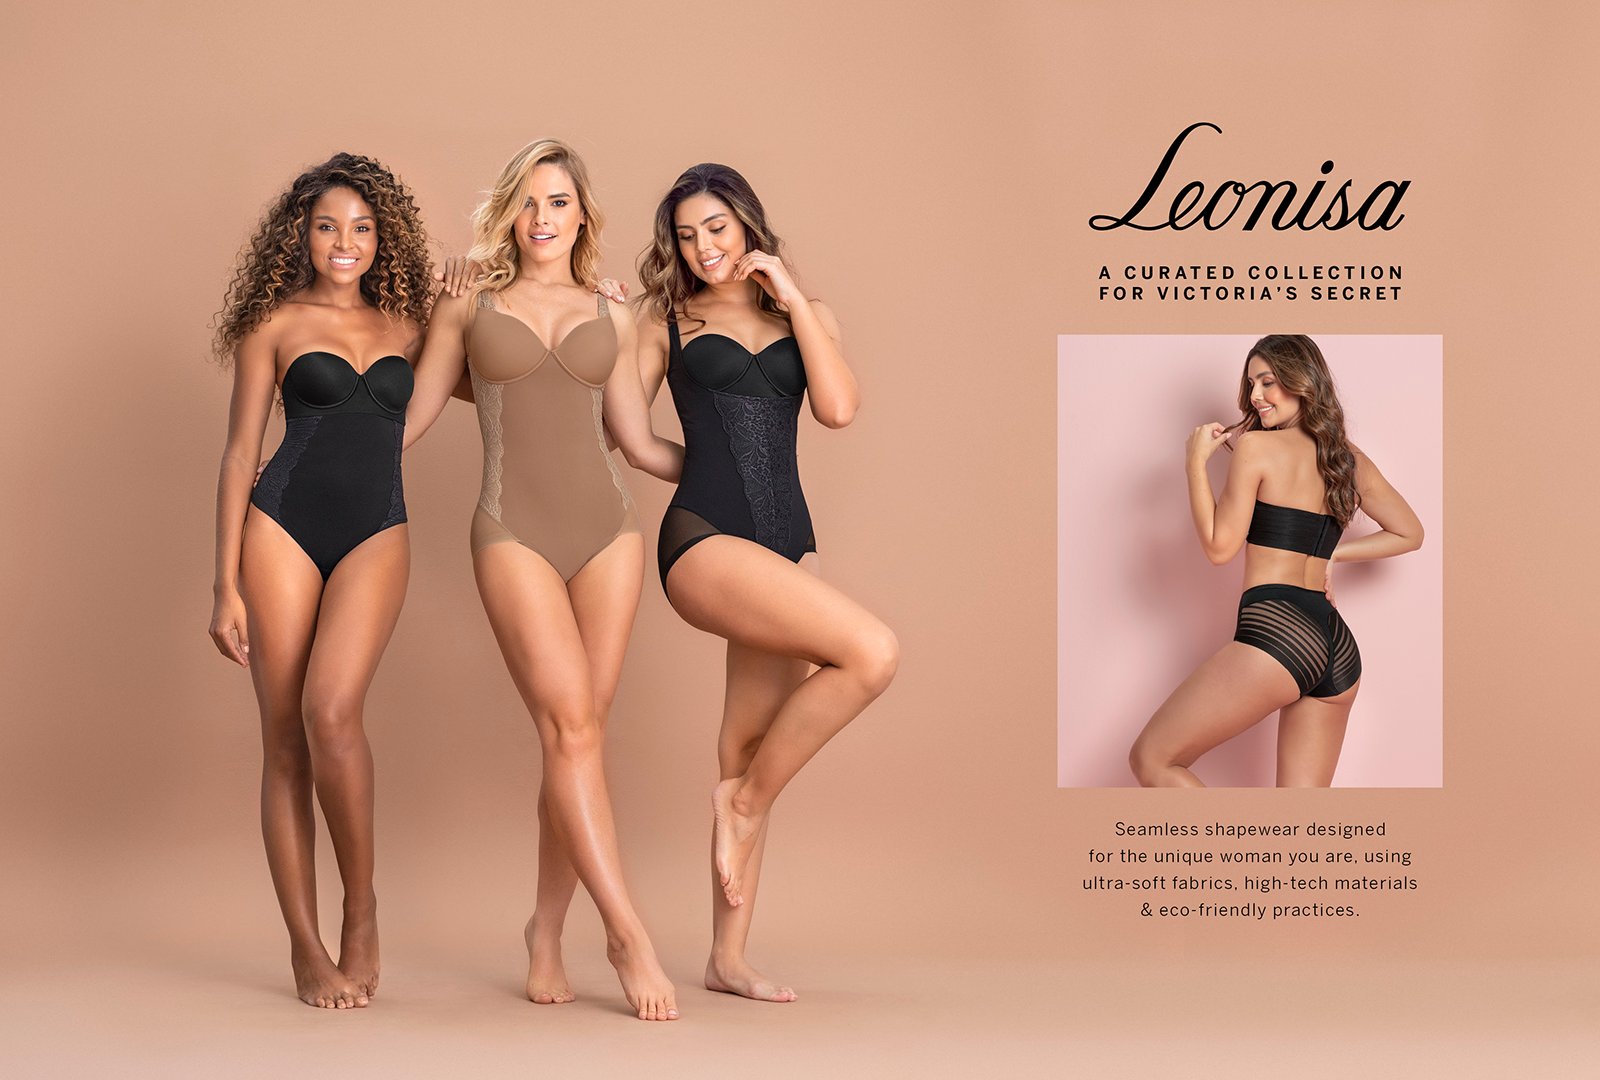 Leonisa A Curated Collection For Victorias Secret. Seamless shapewear designed for the unique women you are, using ultra-soft fabrics, high-tech materials and eco-friendly practices.